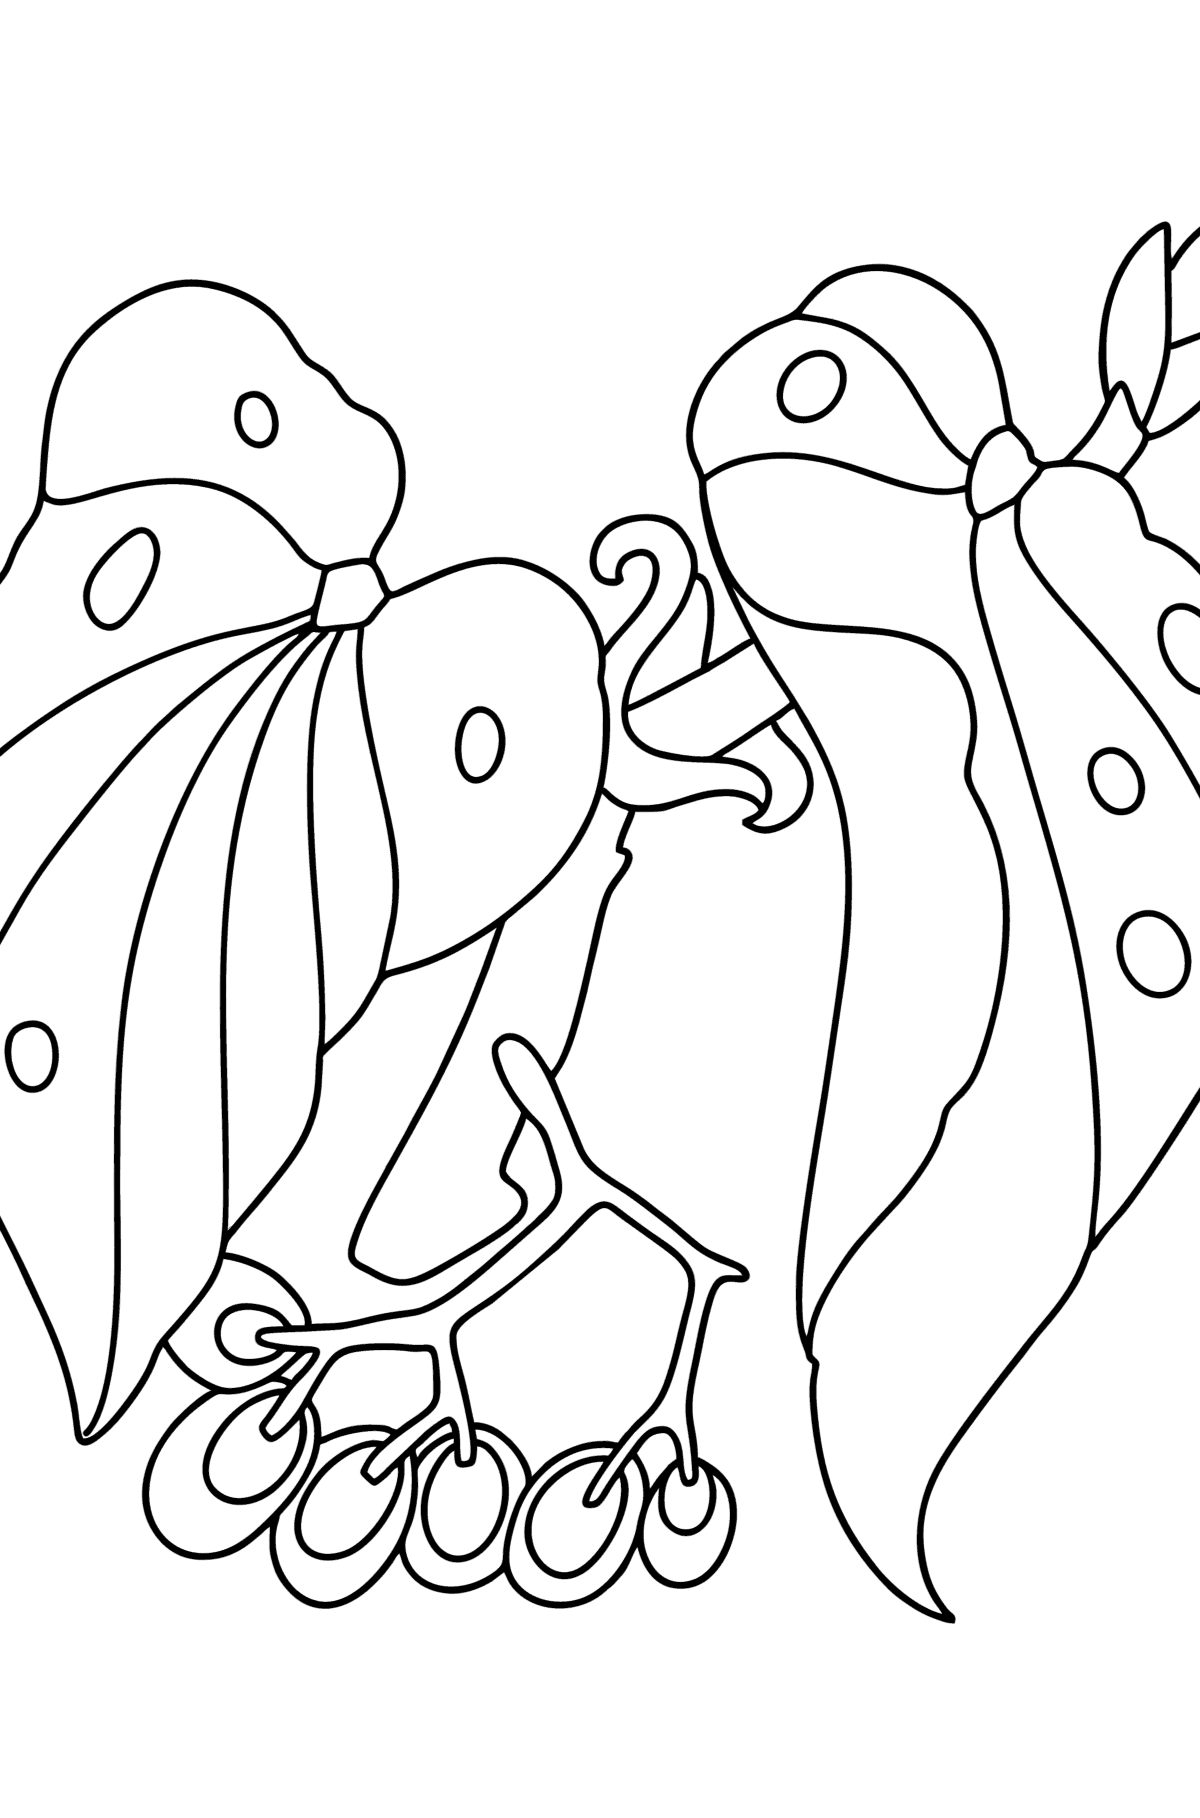 Begonia coloring page - Coloring Pages for Kids